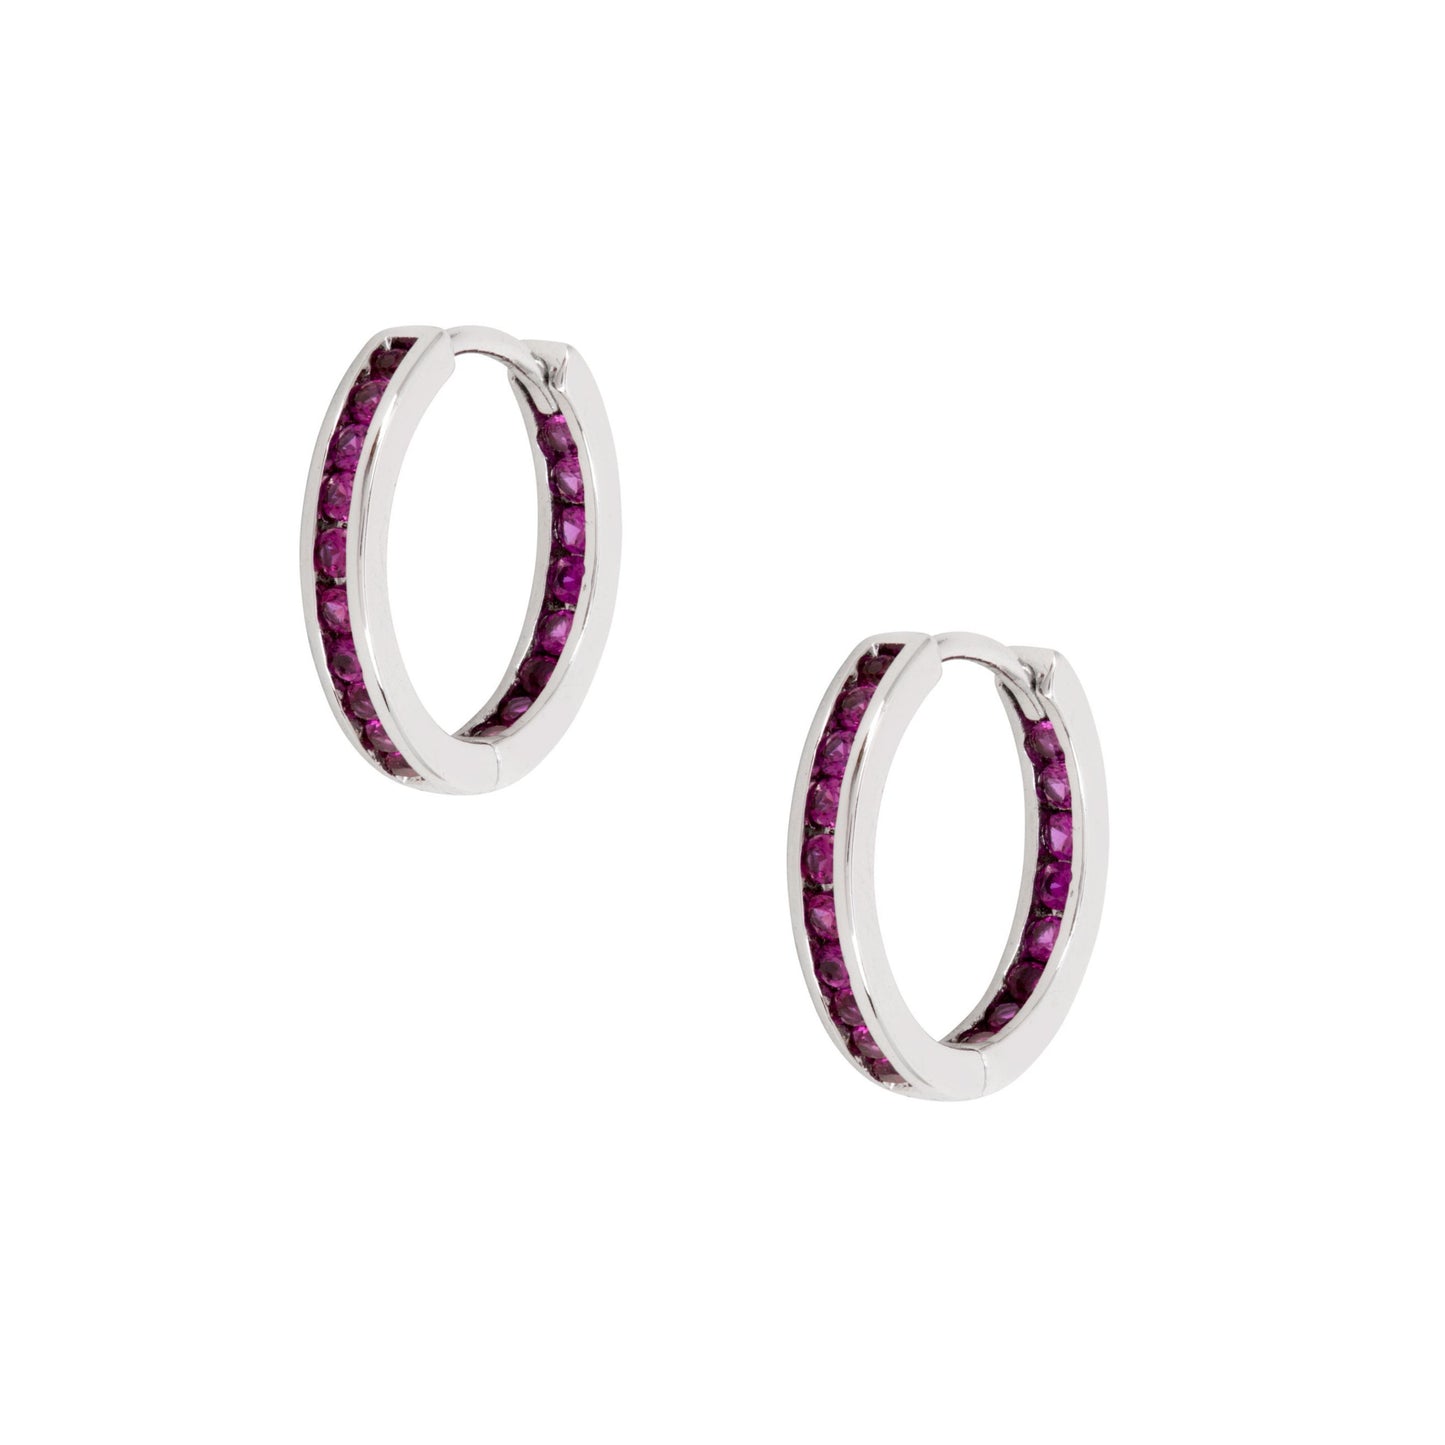 Channel Set Ruby Crystal Hoops - Love & Lilly Jewellery